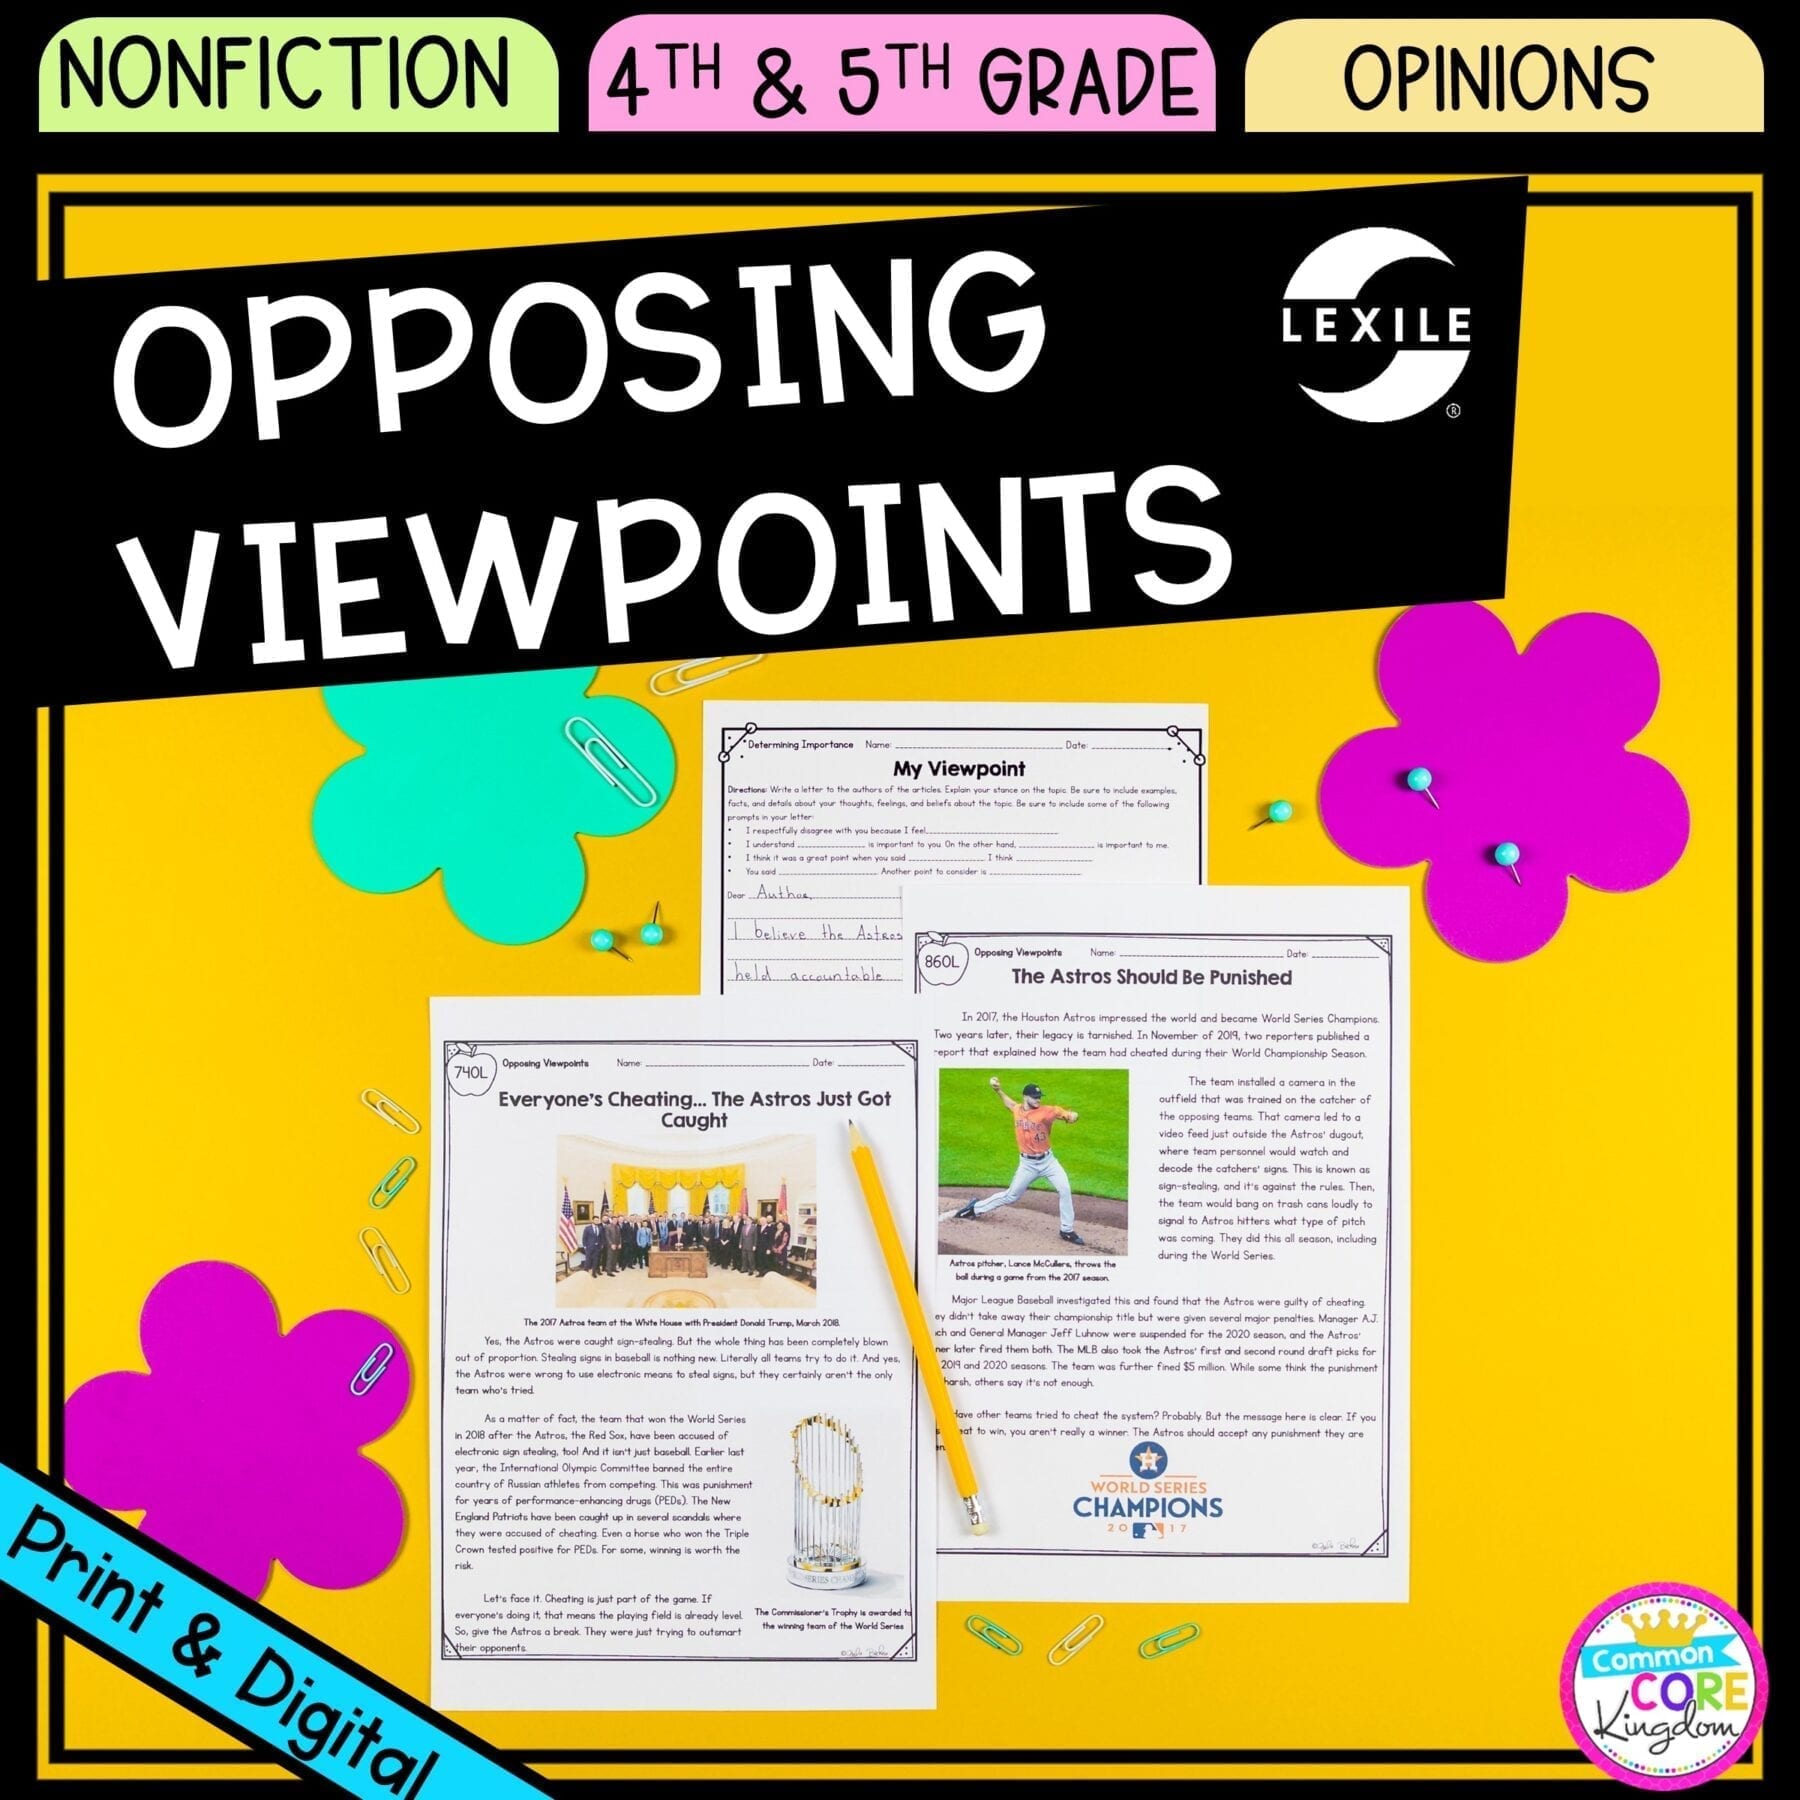 Opposing Viewpoints cover for 4th & 5th grade showing printable and digital worksheets